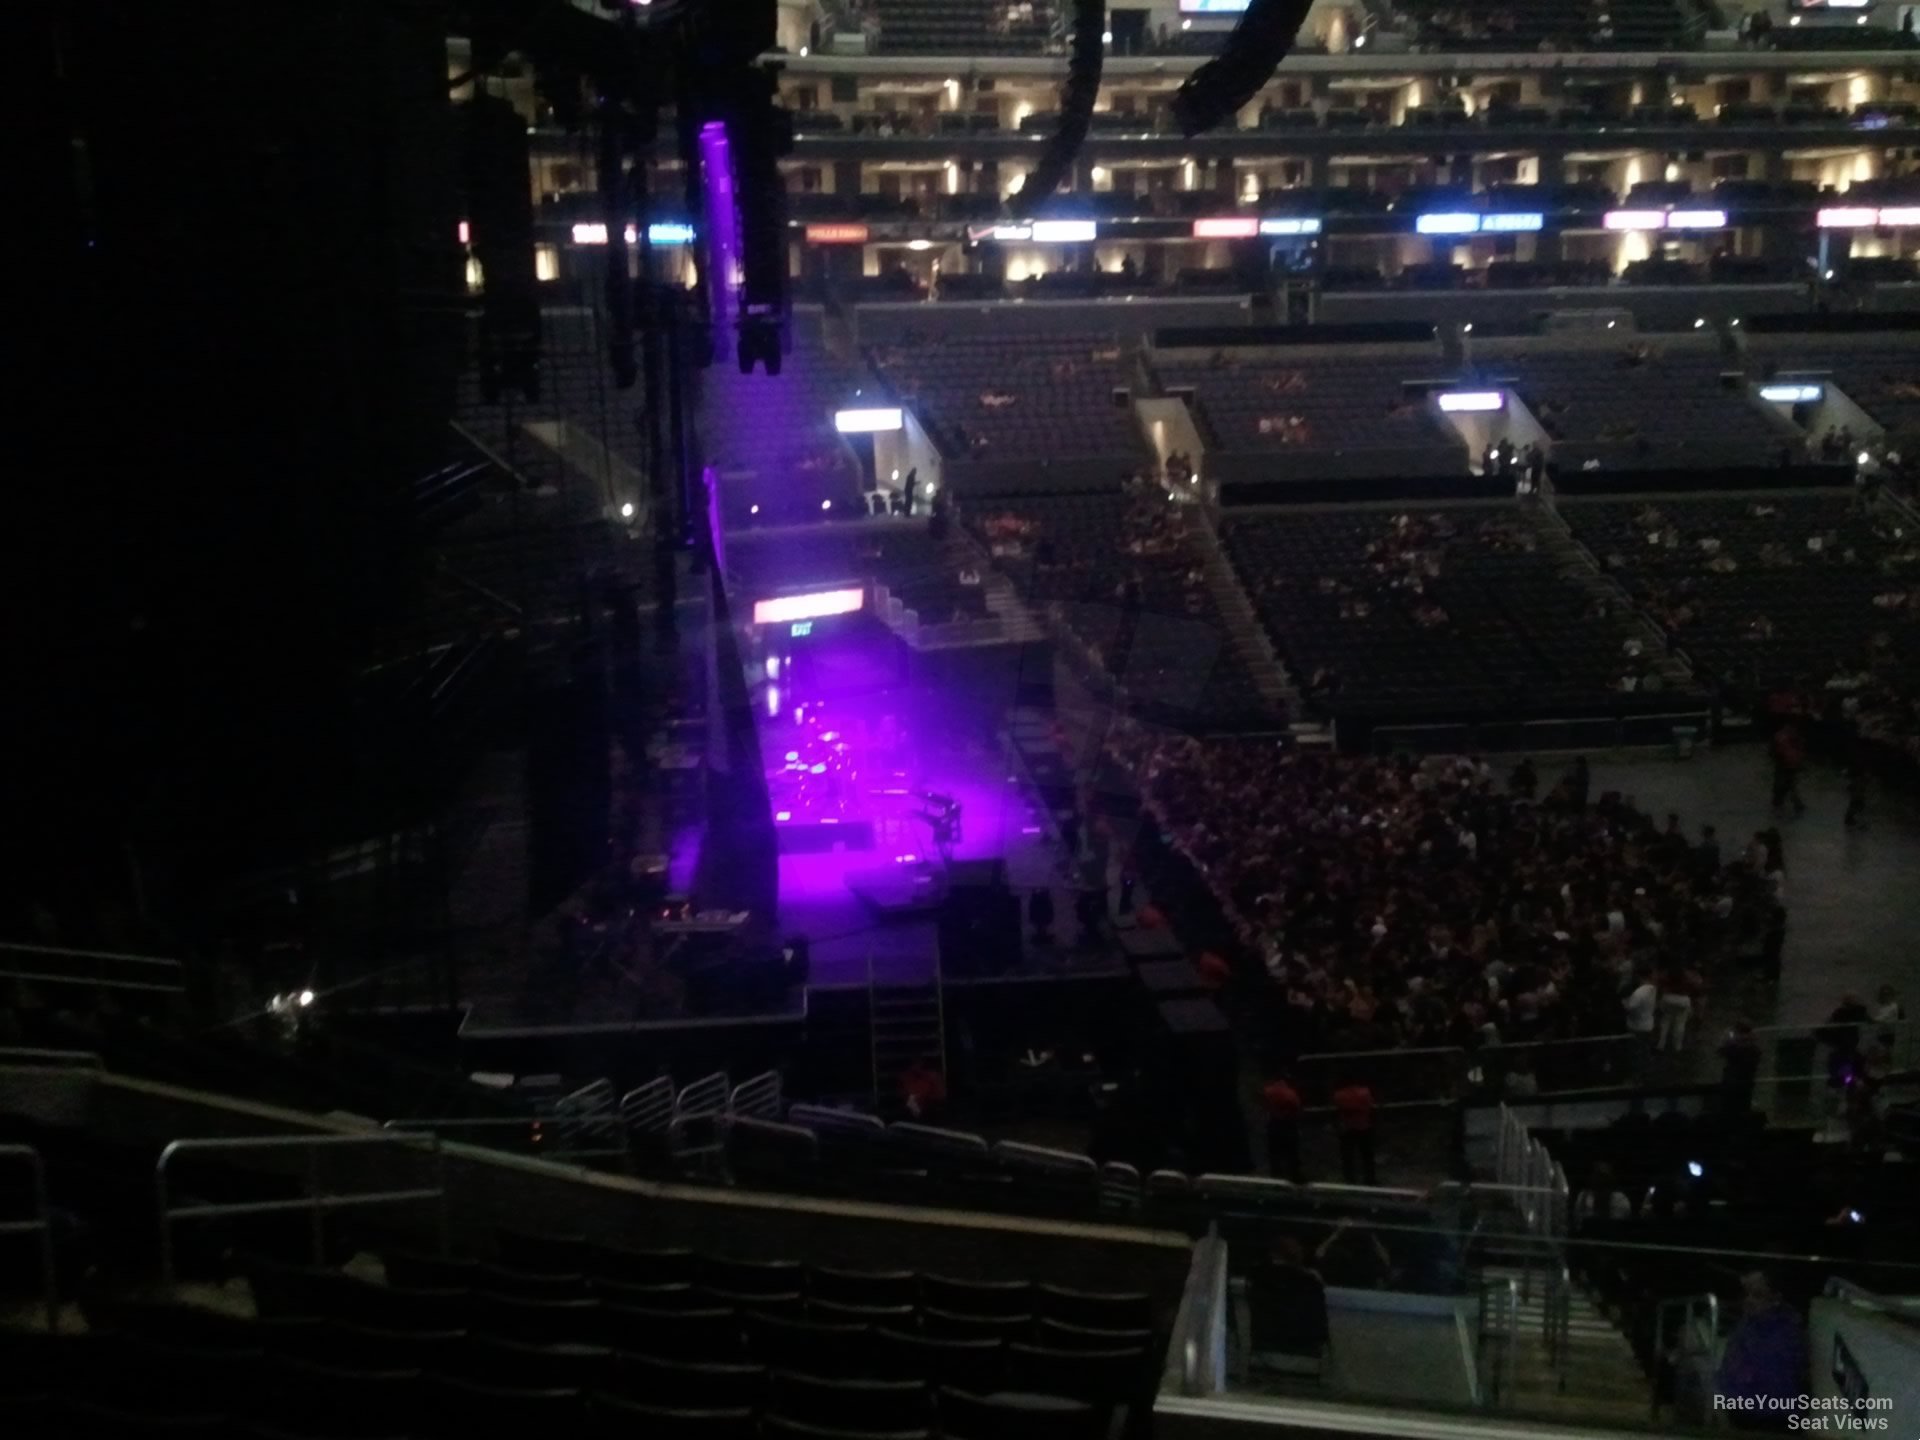 section 17, row 12 seat view  for concert - crypto.com arena